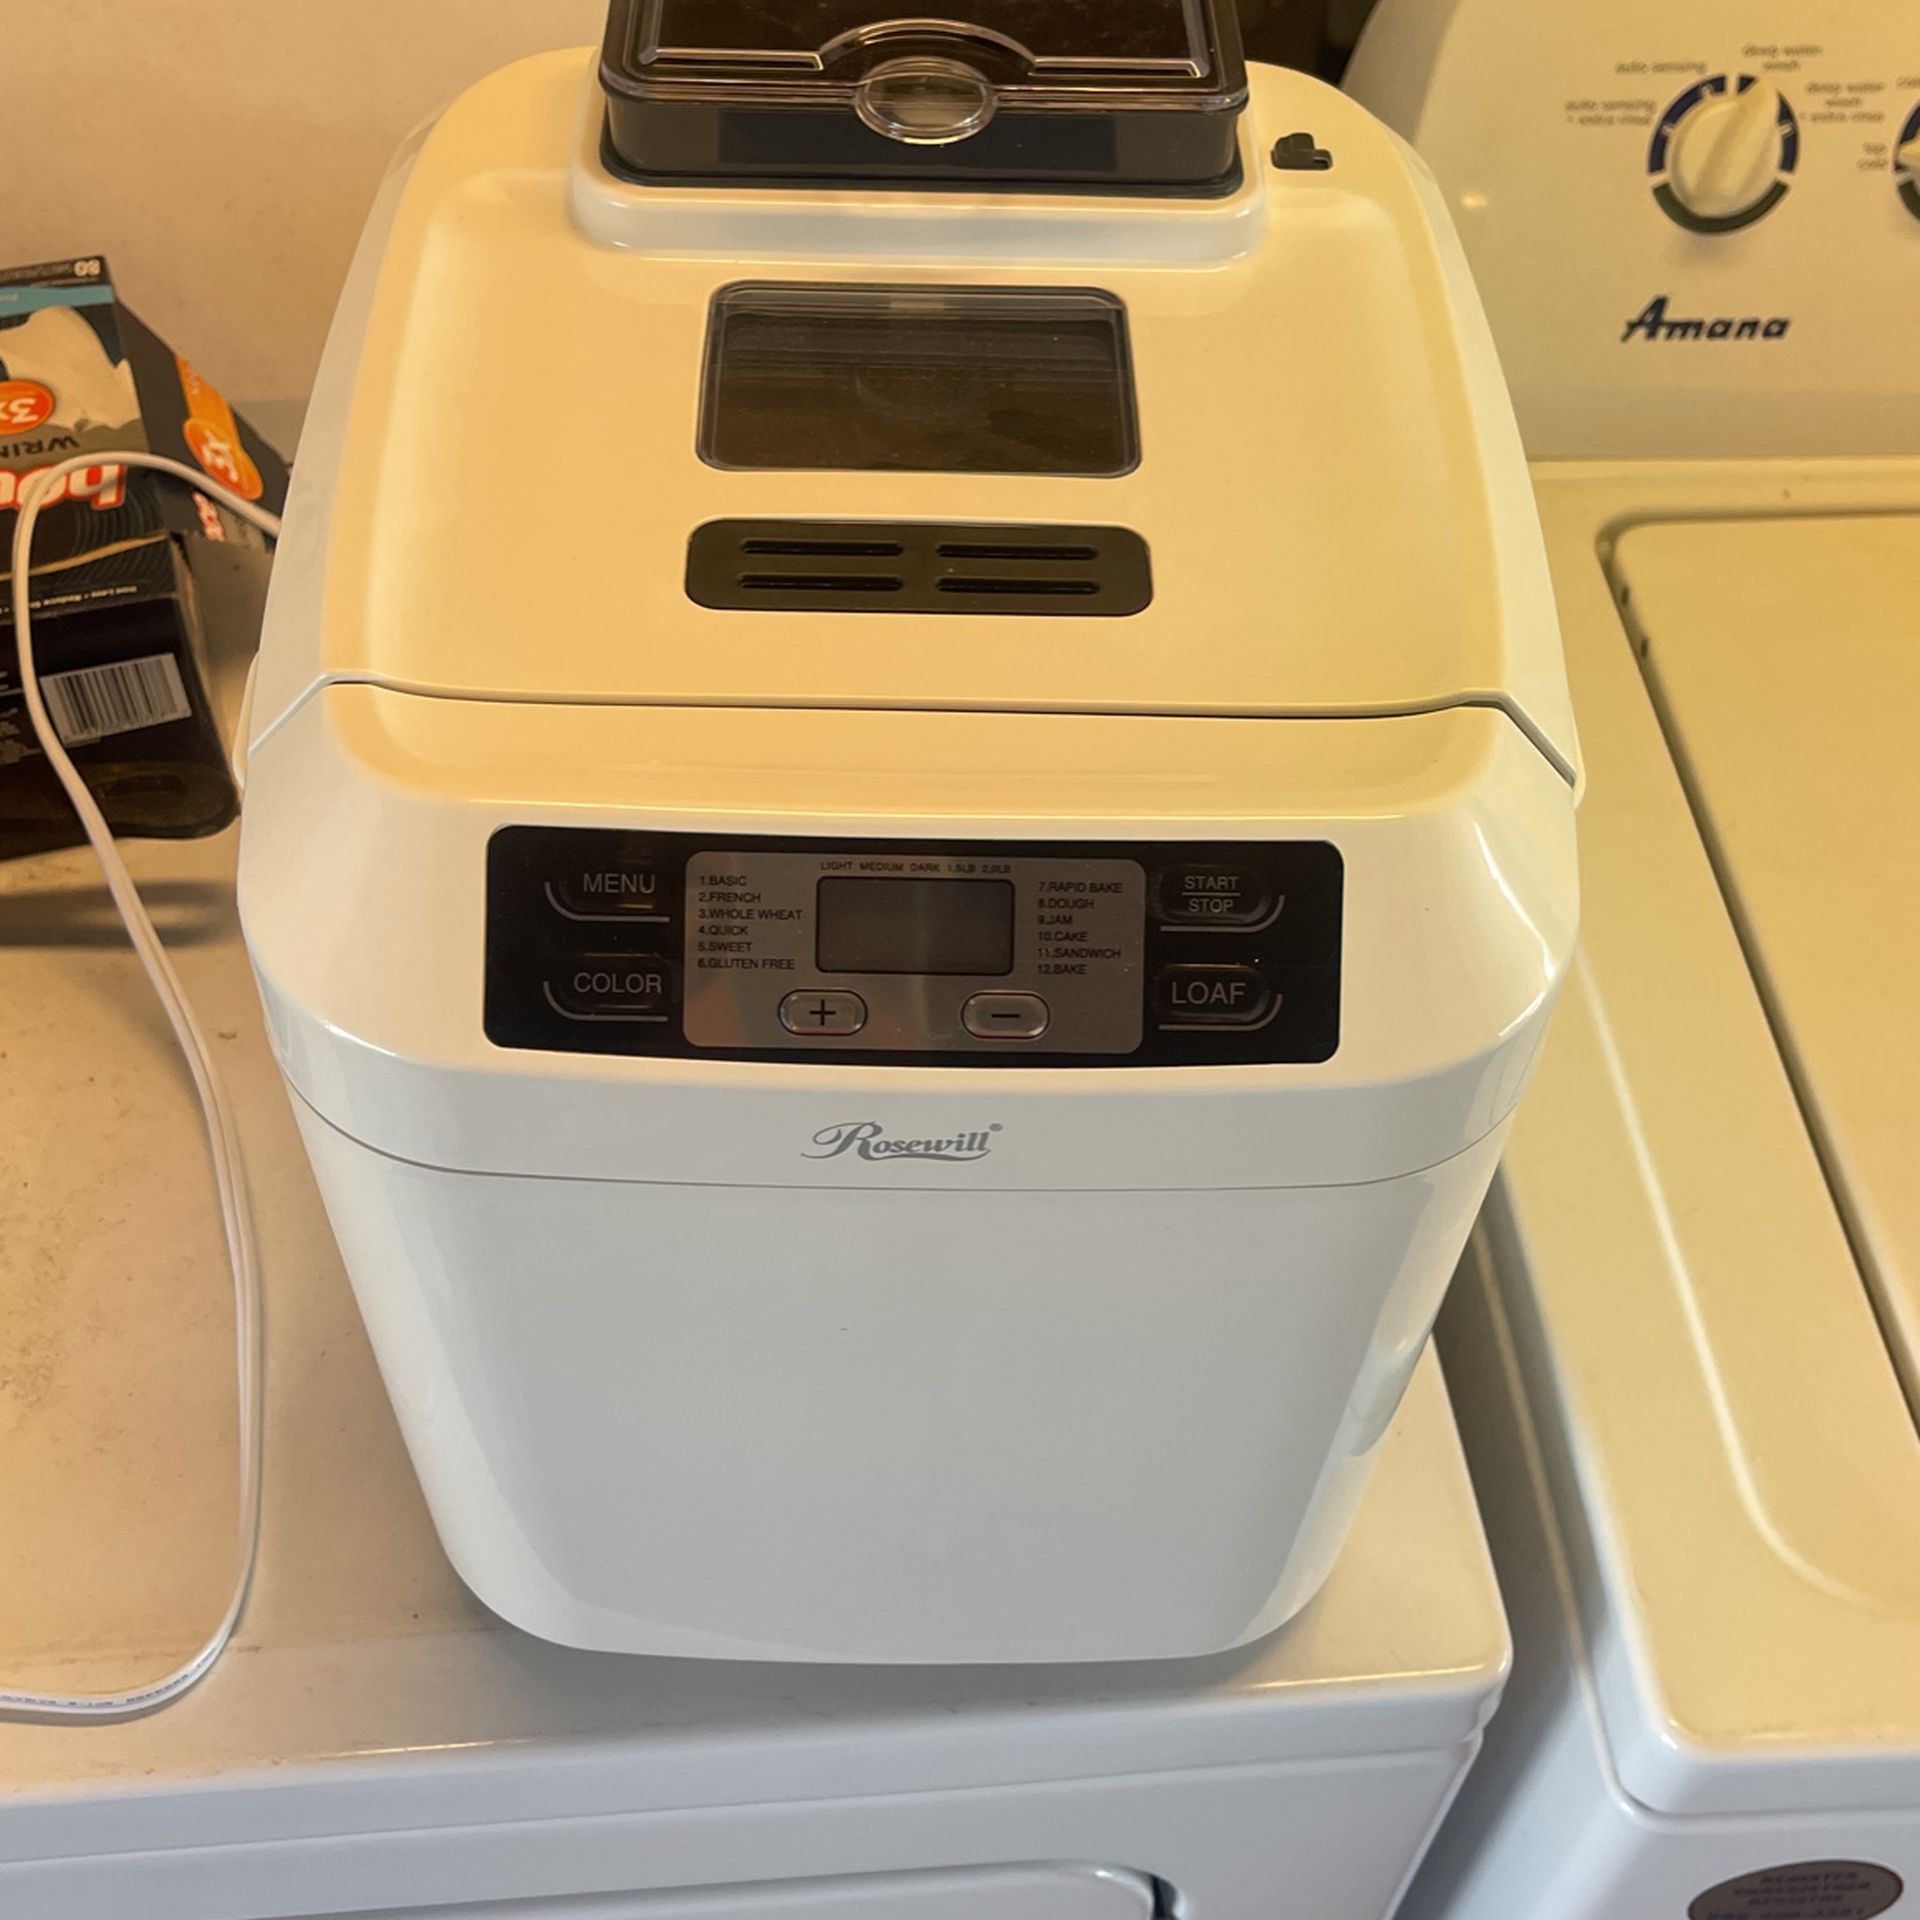 Rosewill 2 Pound Bread Maker 